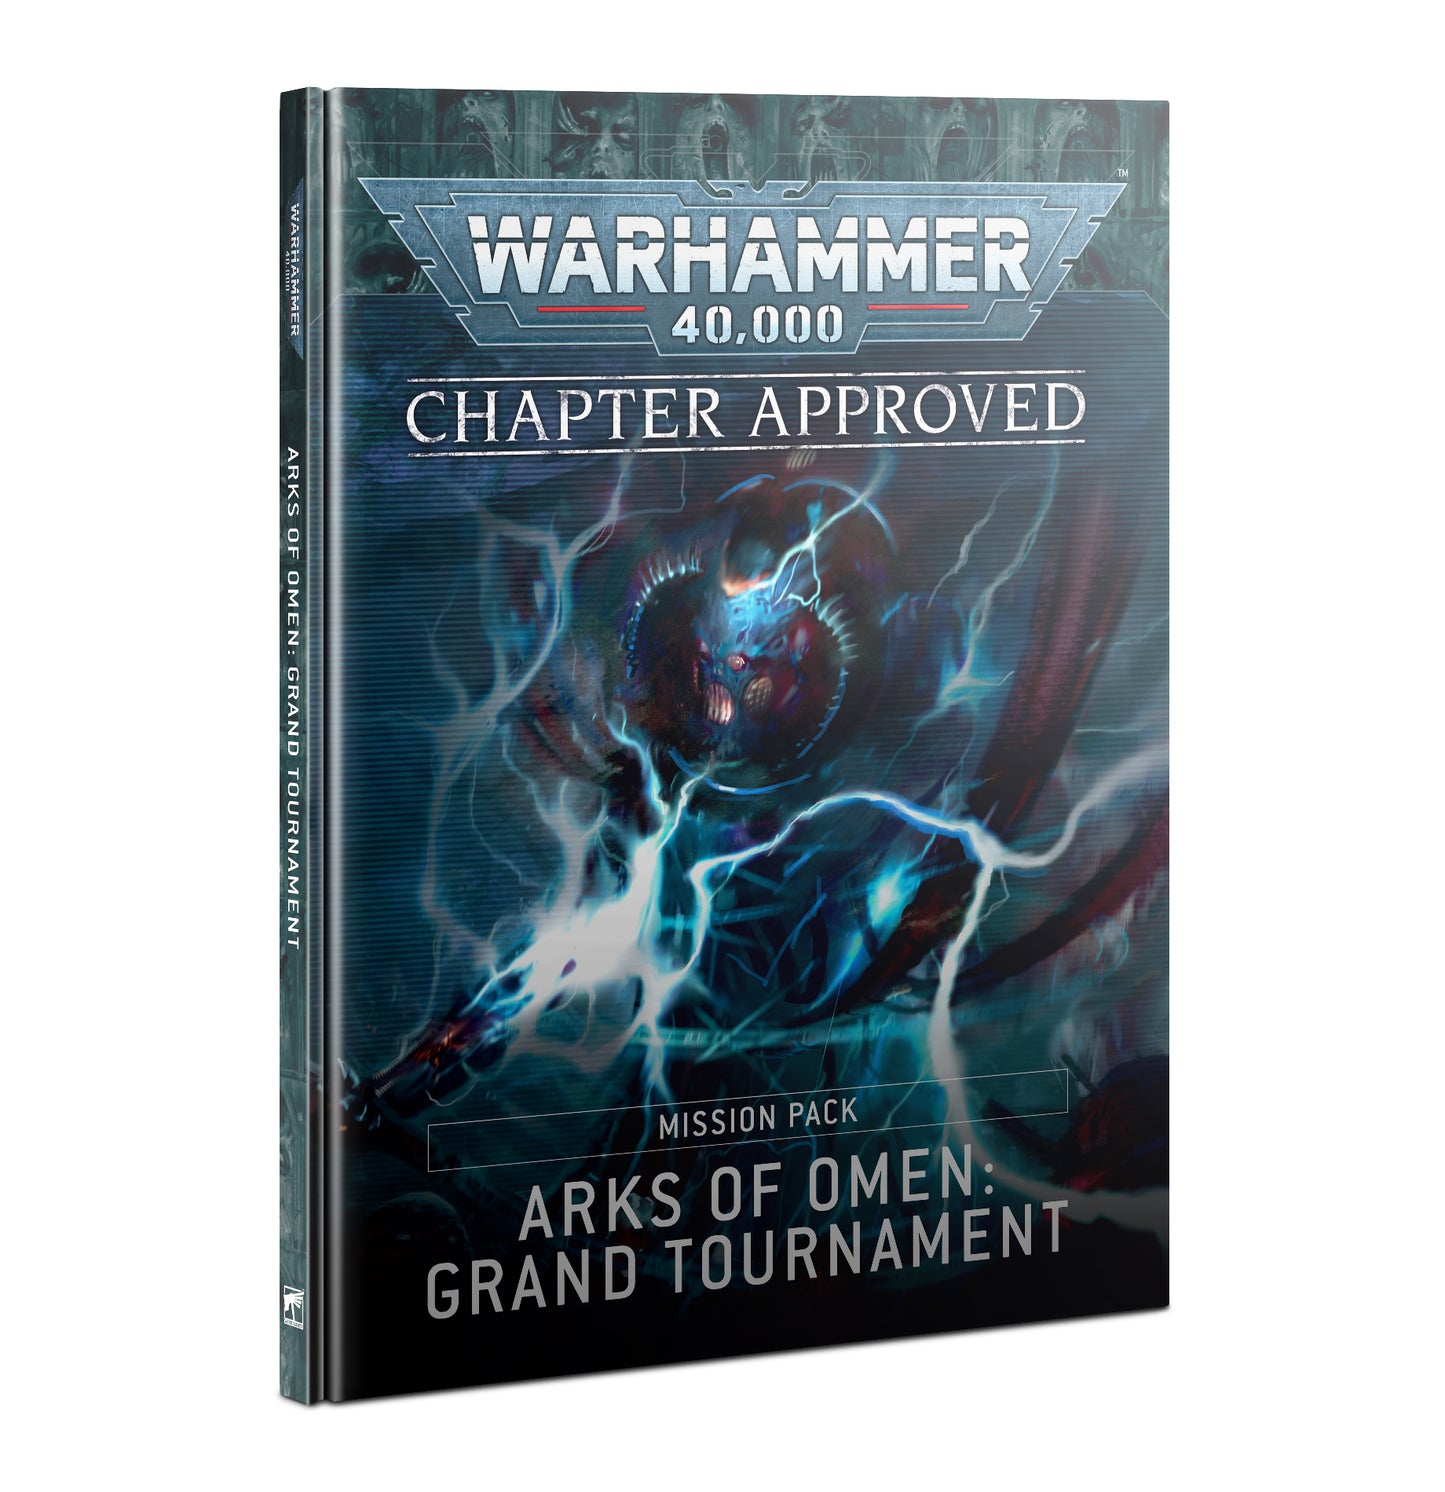 Warhammer 40,000 Grand Tournament Mission Pack & Points Book 23 (English)